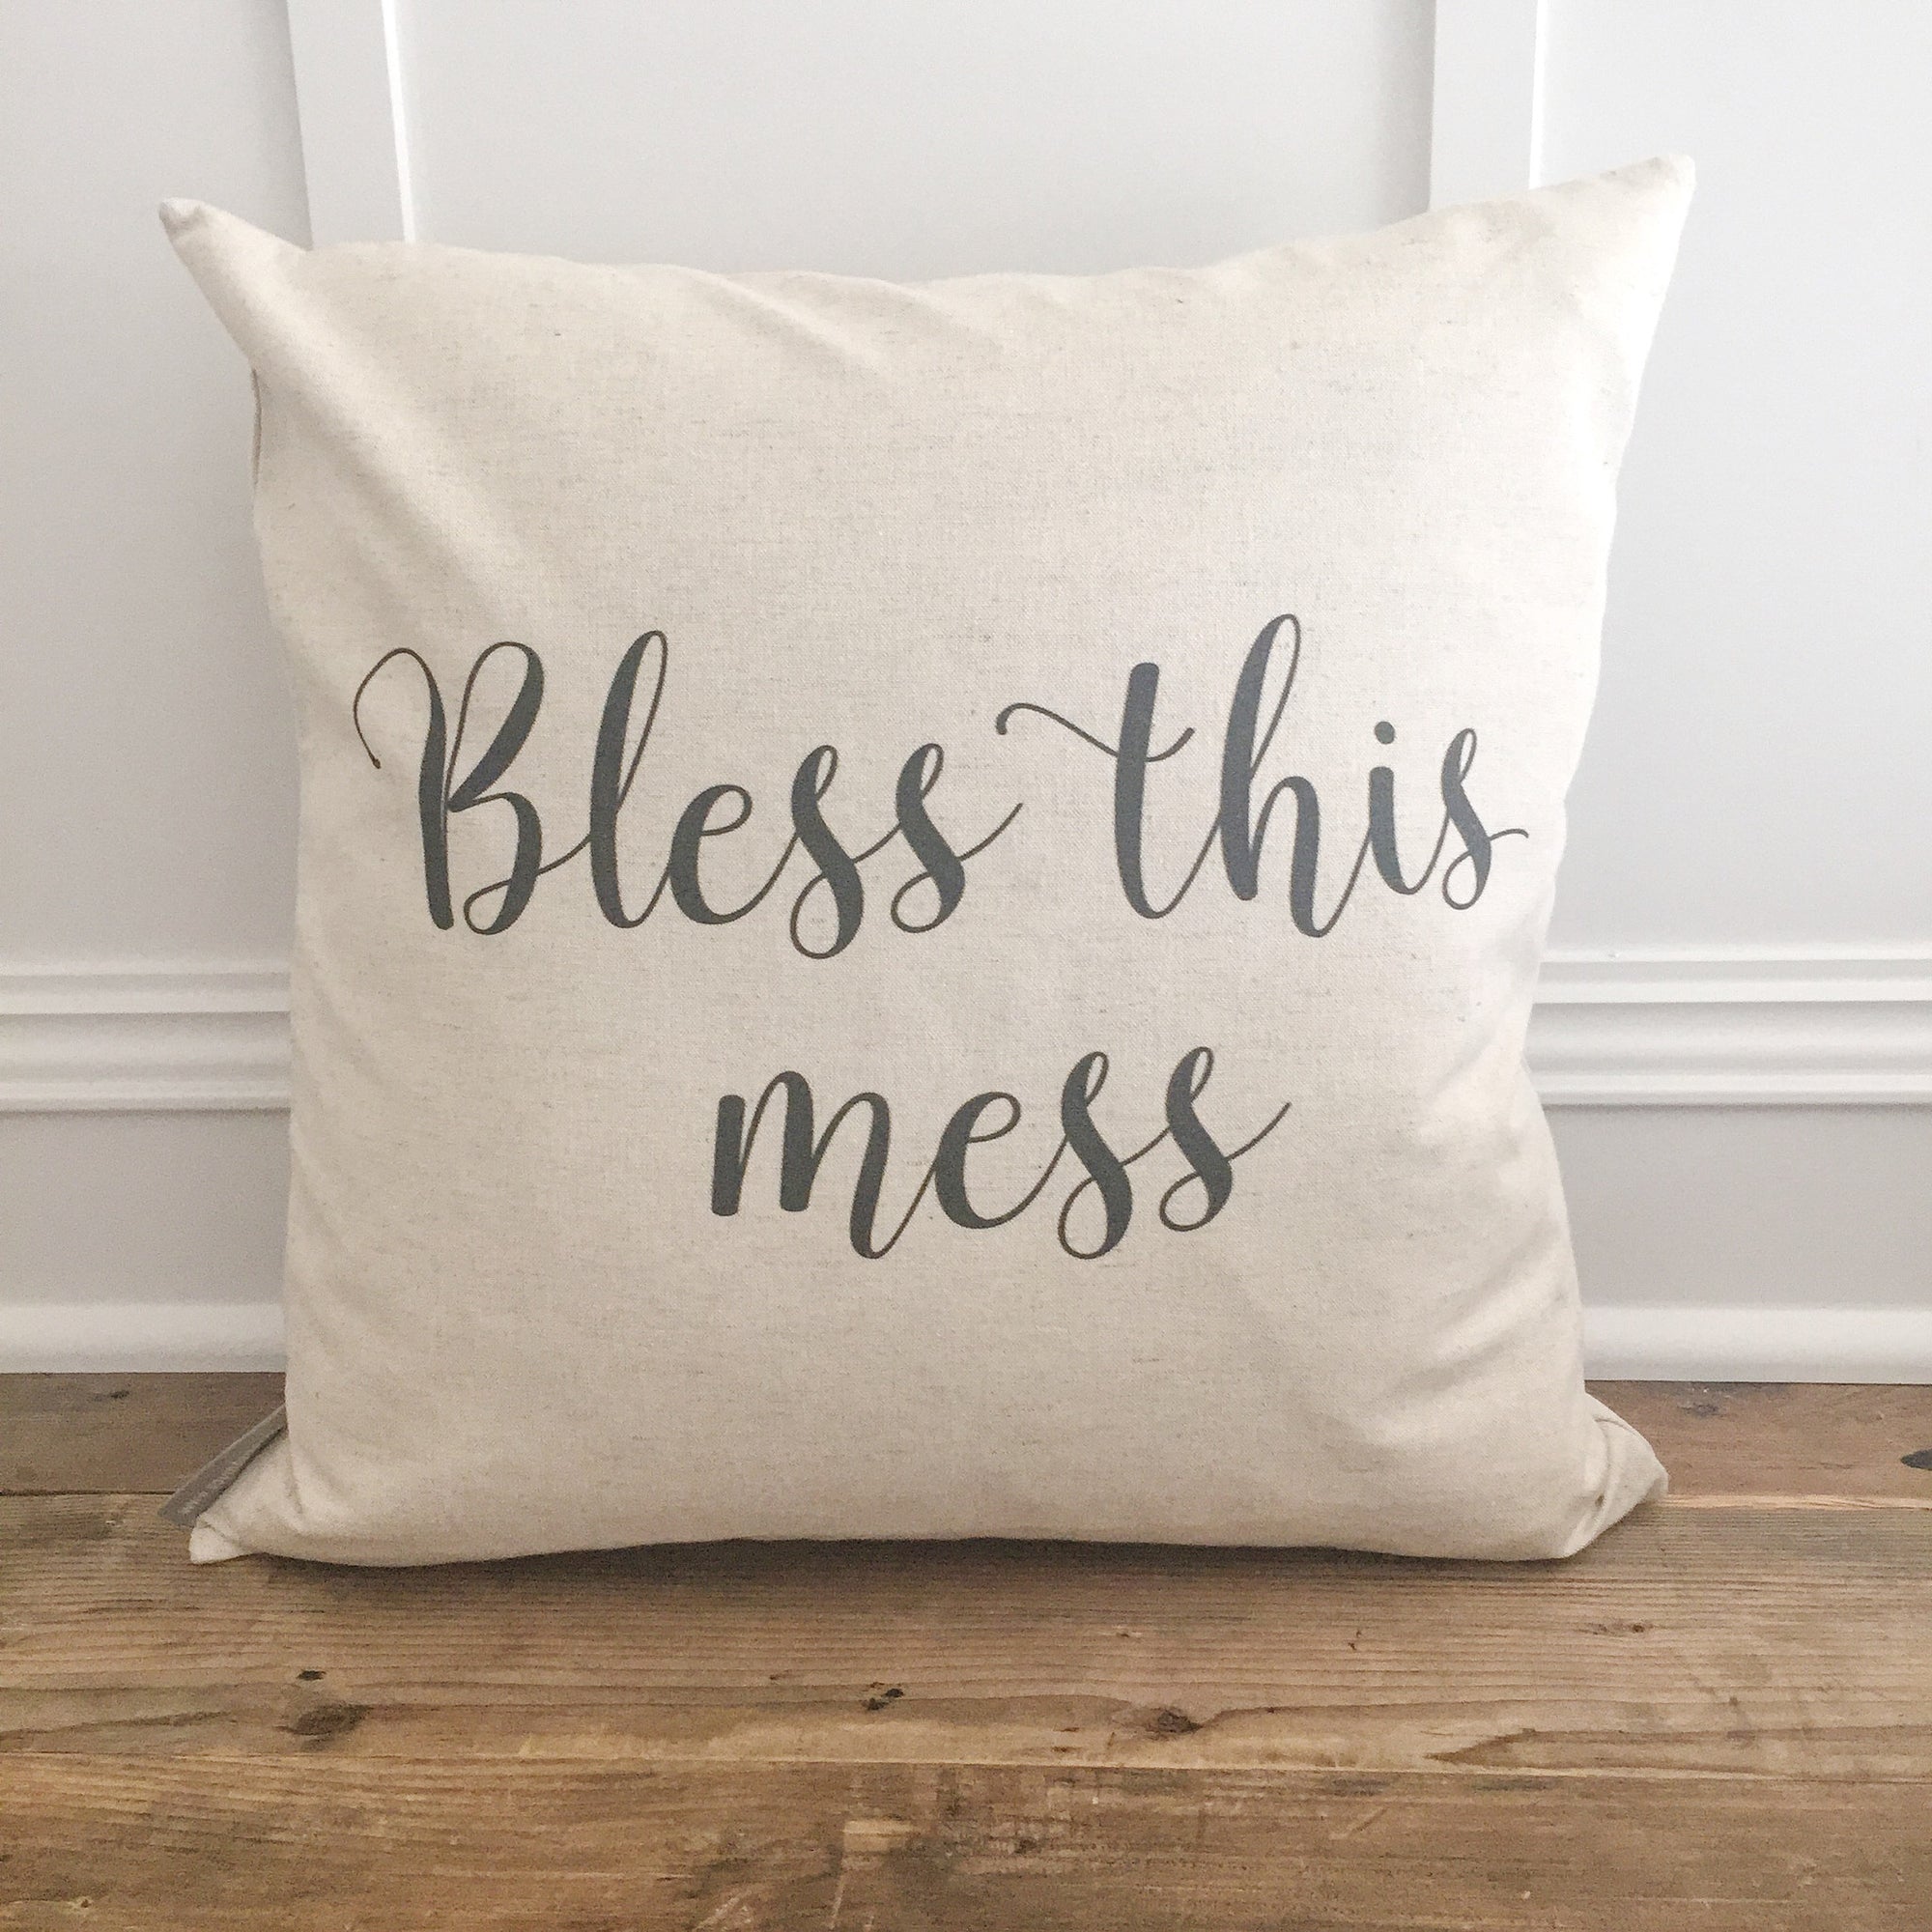 Bless This Mess Pillow Cover - Linen and Ivory